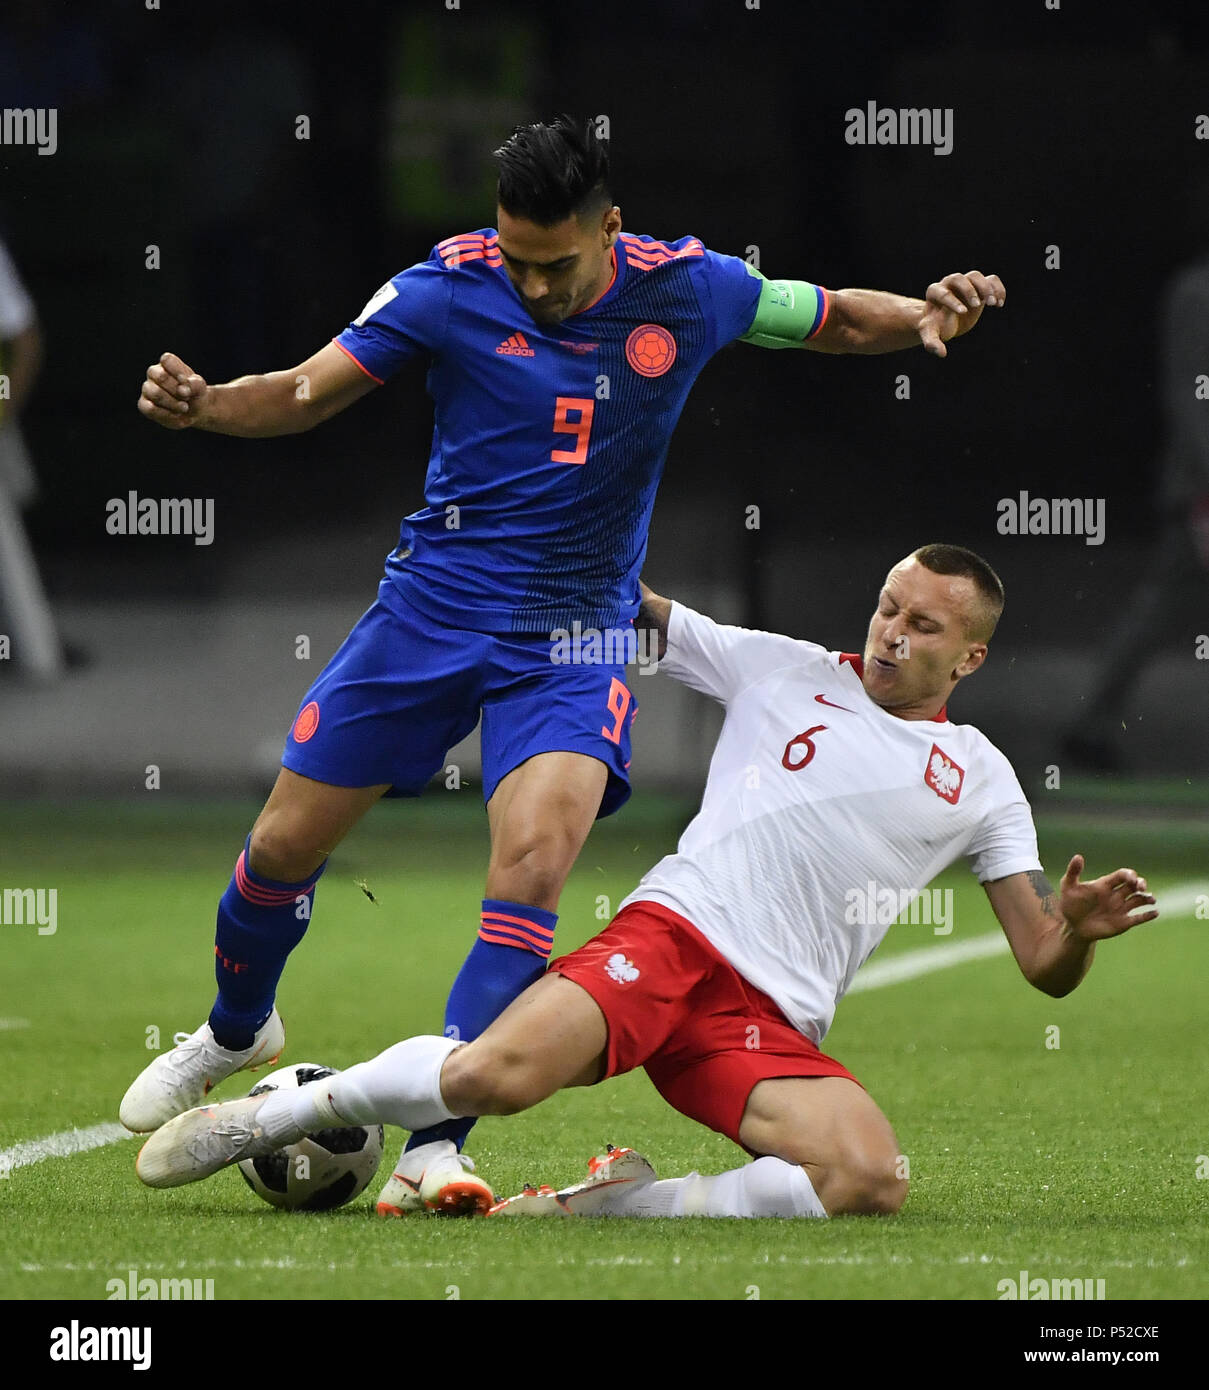 Kazan, Russia. 24th June, 2018. Jacek Goralski (R) of Poland vies with Radamel Falcao of Colombia during the 2018 FIFA World Cup Group H match between Poland and Colombia in Kazan, Russia, June 24, 2018. Colombia won 3-0. Credit: He Canling/Xinhua/Alamy Live News Stock Photo